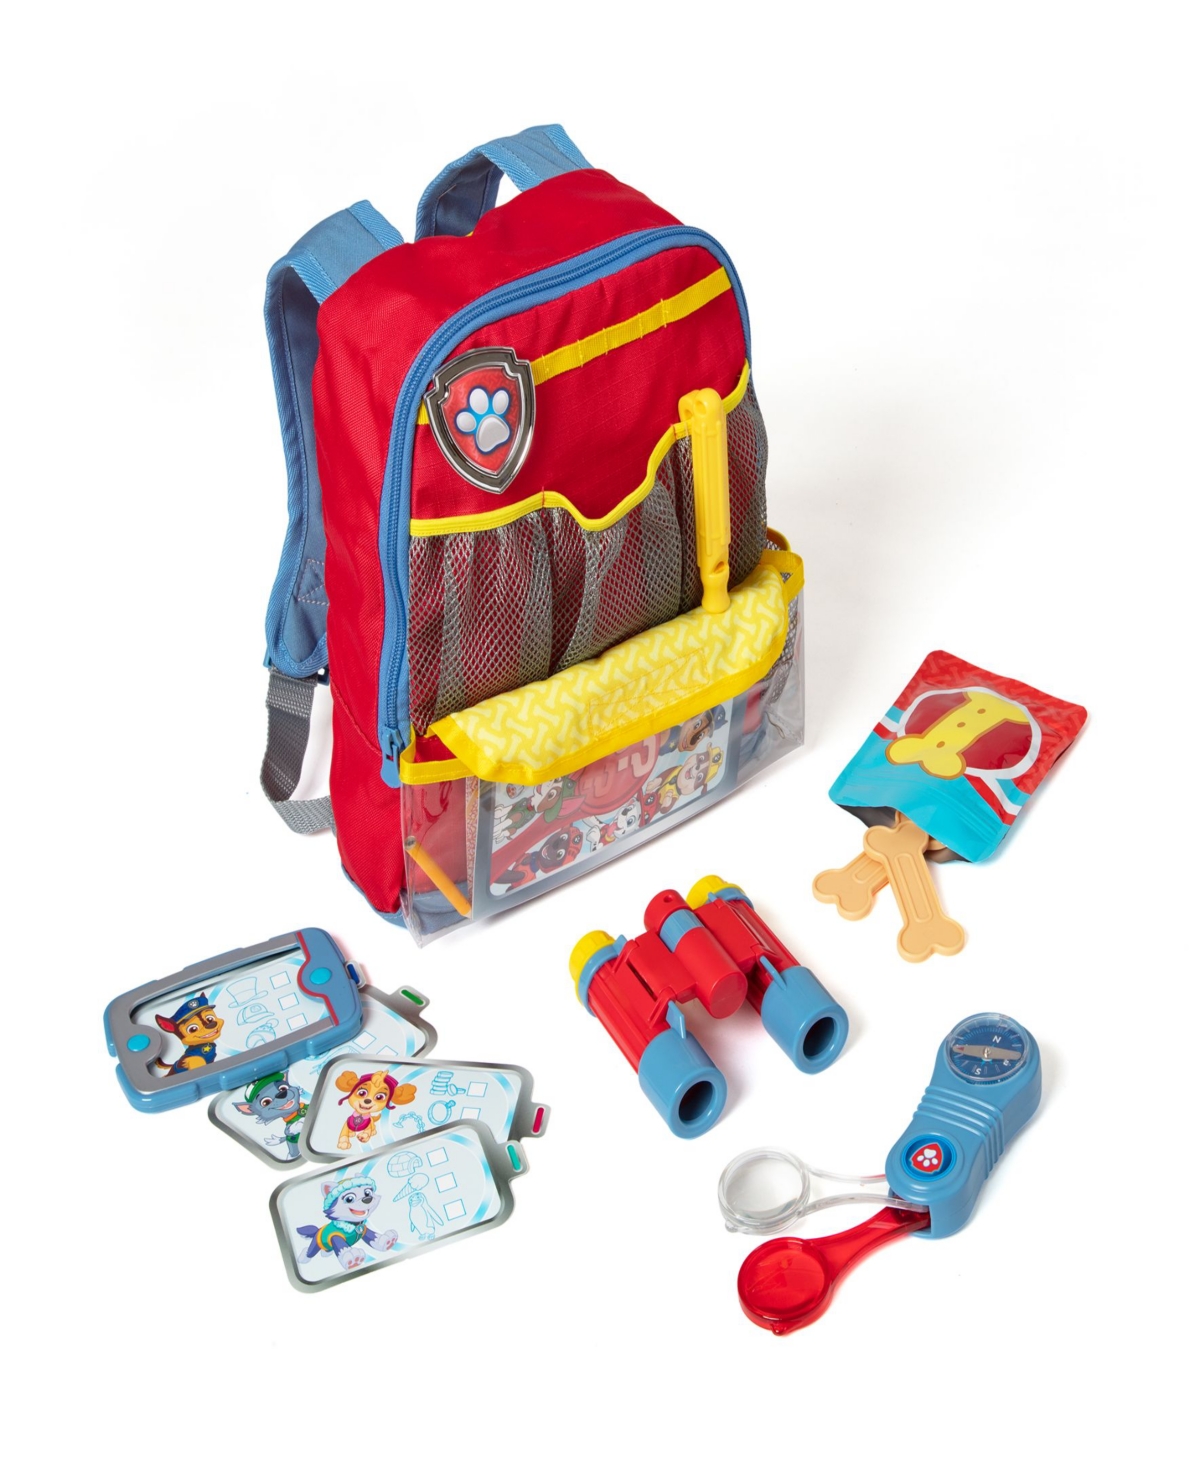 Melissa & Doug Toys: Paw Patrol Adventure Pack $19.95, Blues Clues Mailbox Play Set $13.15 & More at Macy's w/ Free Store Pickup or Free S&H on $25+